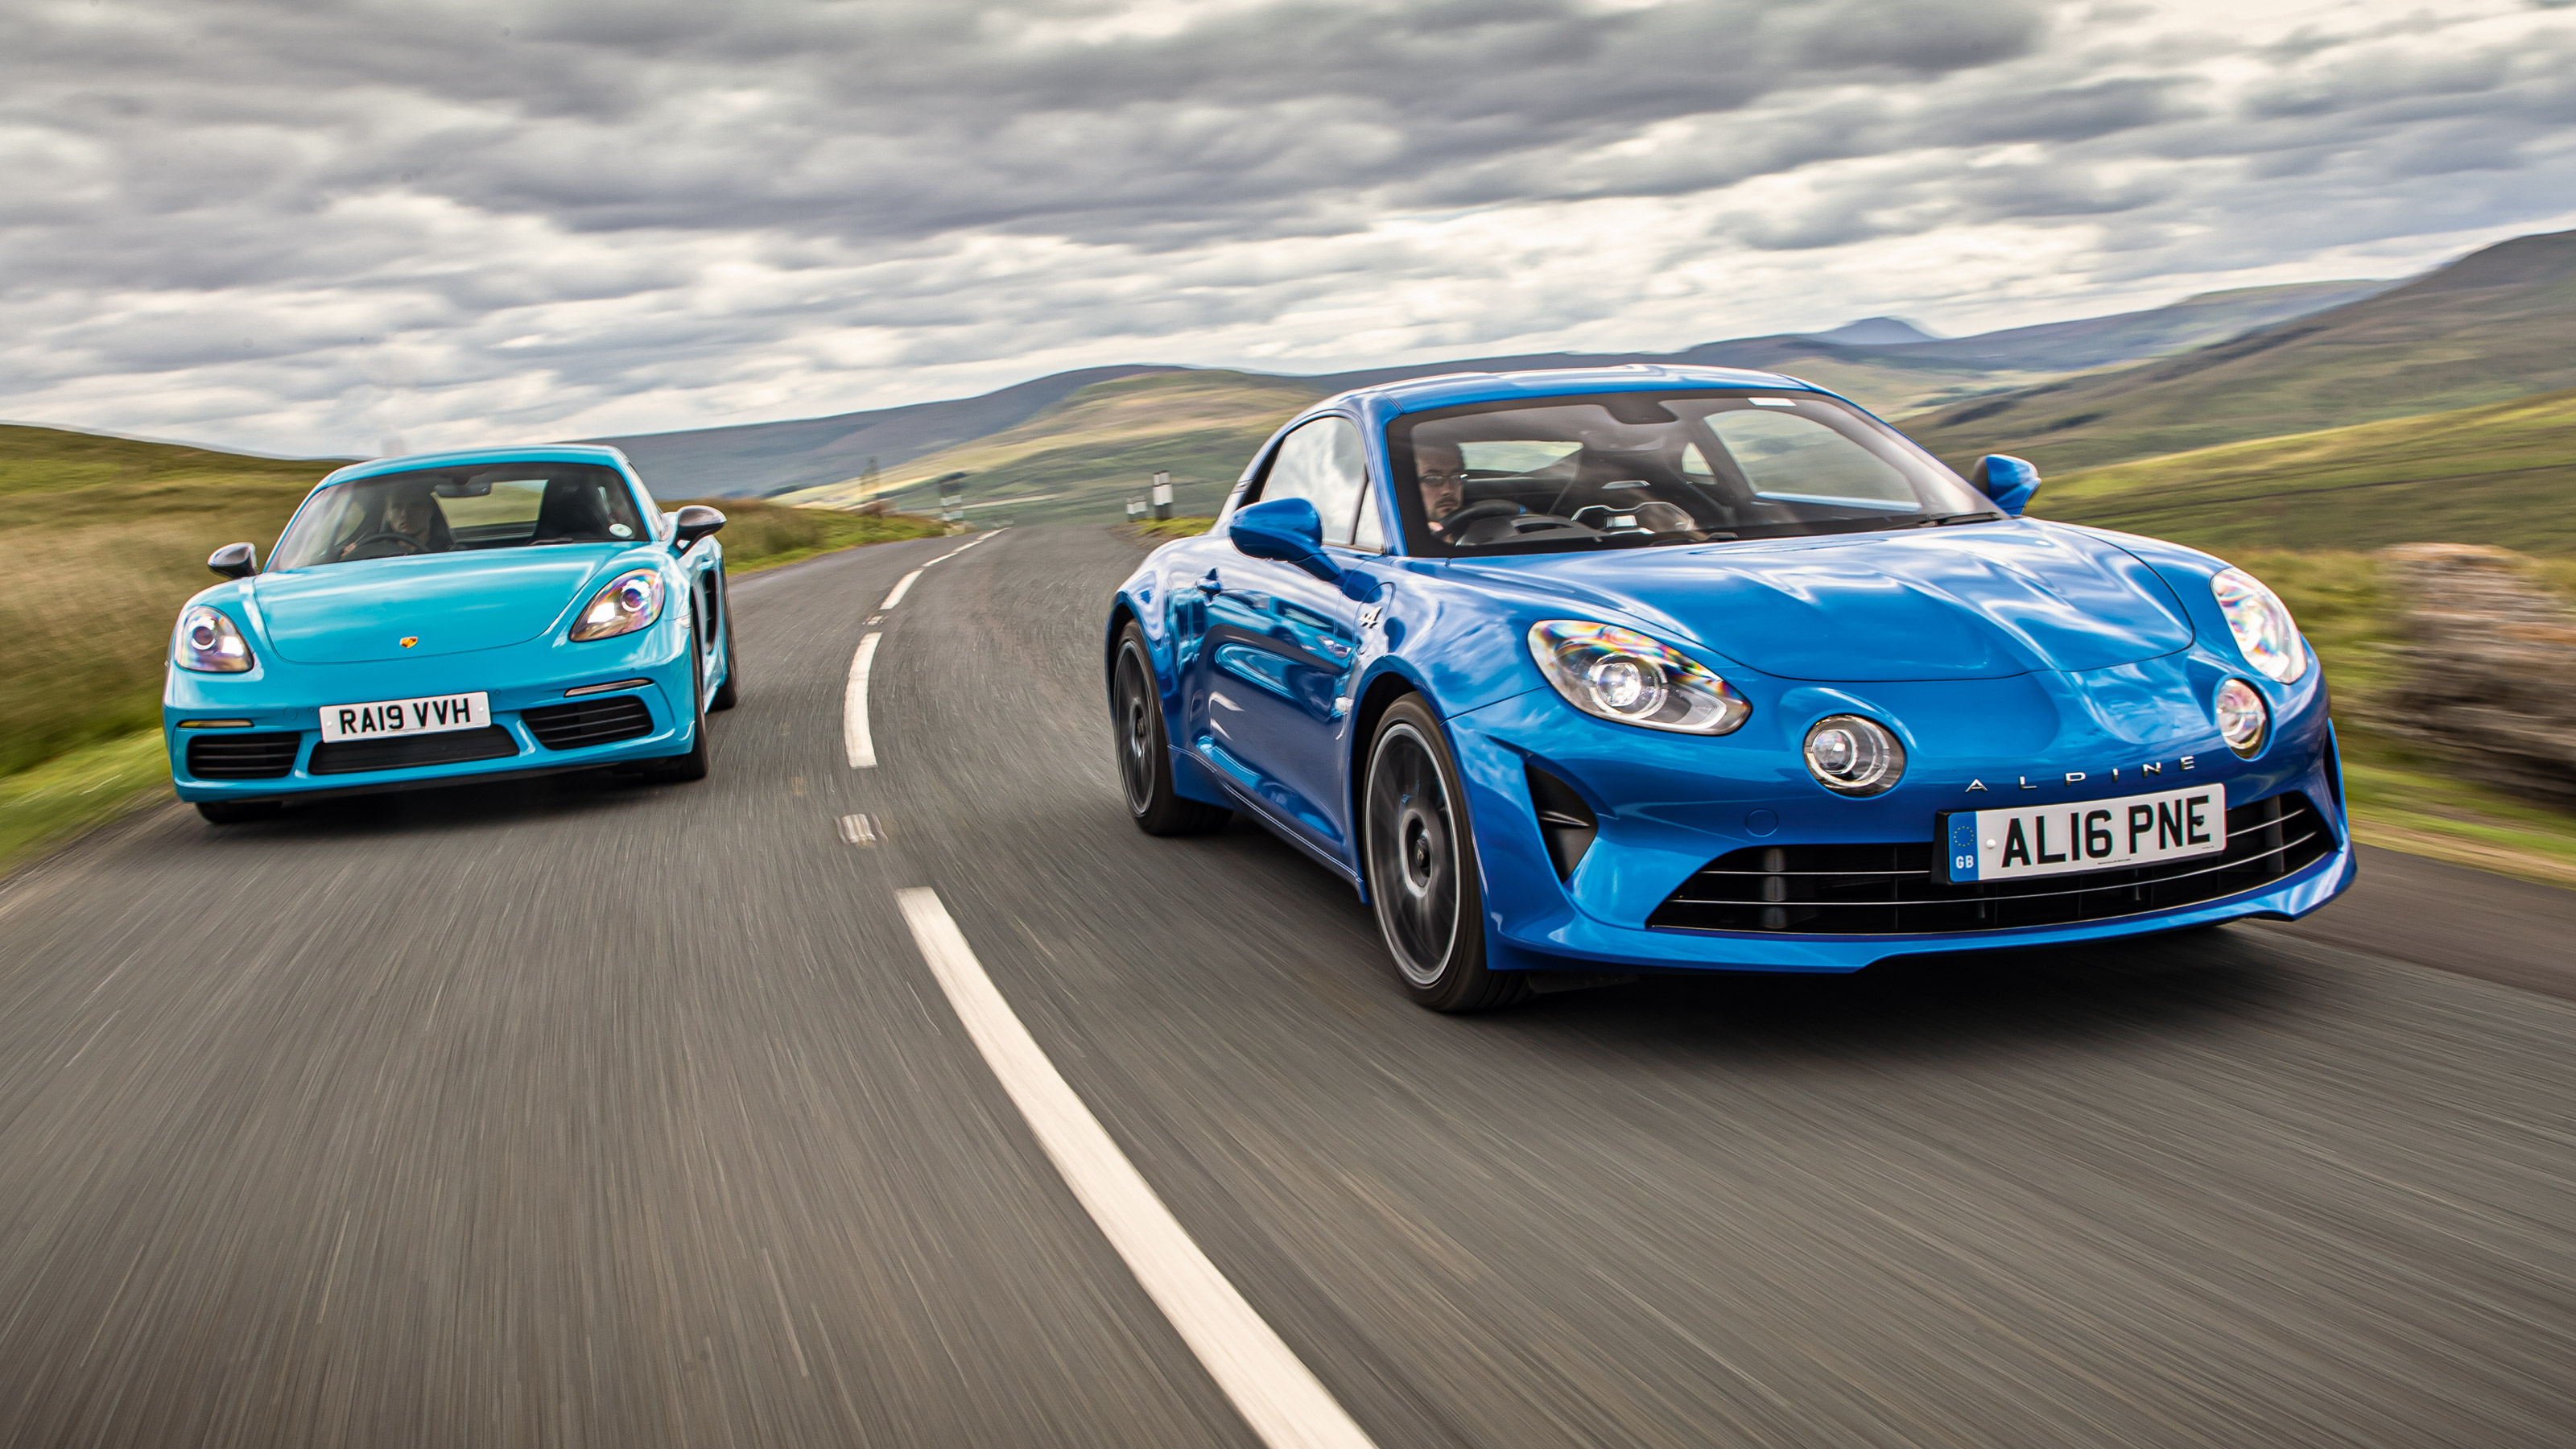 James May Says His Alpine A110 Isn't A Sports Car, It's A